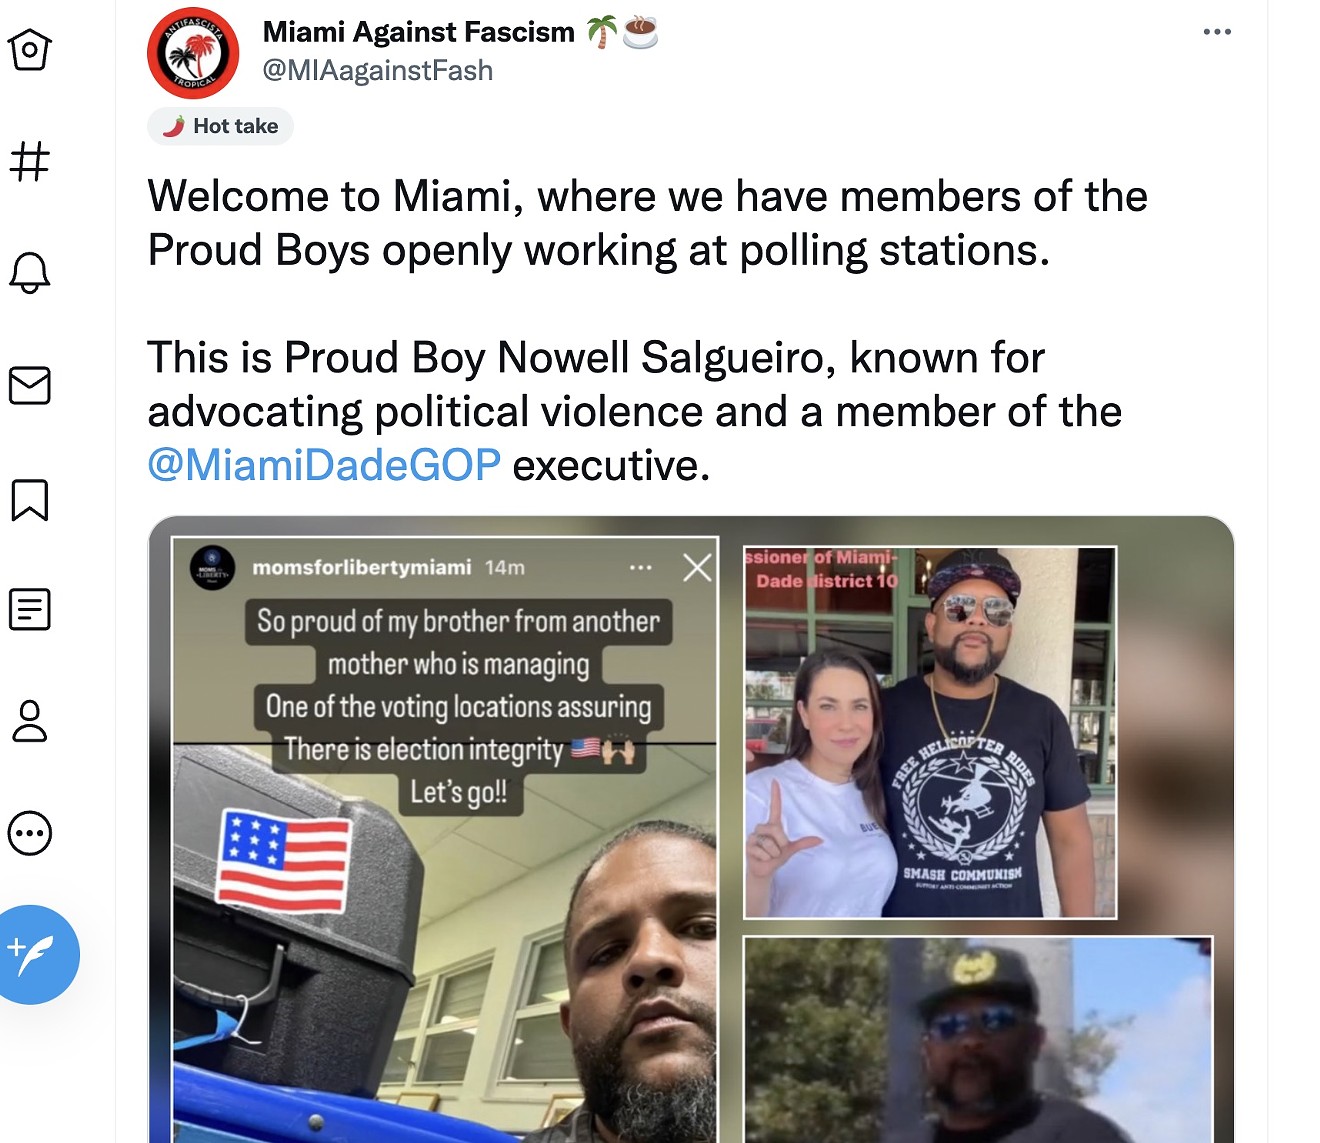 The Twitter account Miami Against Fascism identified this poll worker as "Proud Boy Nowell Salgueiro, known for advocating political violence and a member of the @MamiDadeGOP executive [committee].